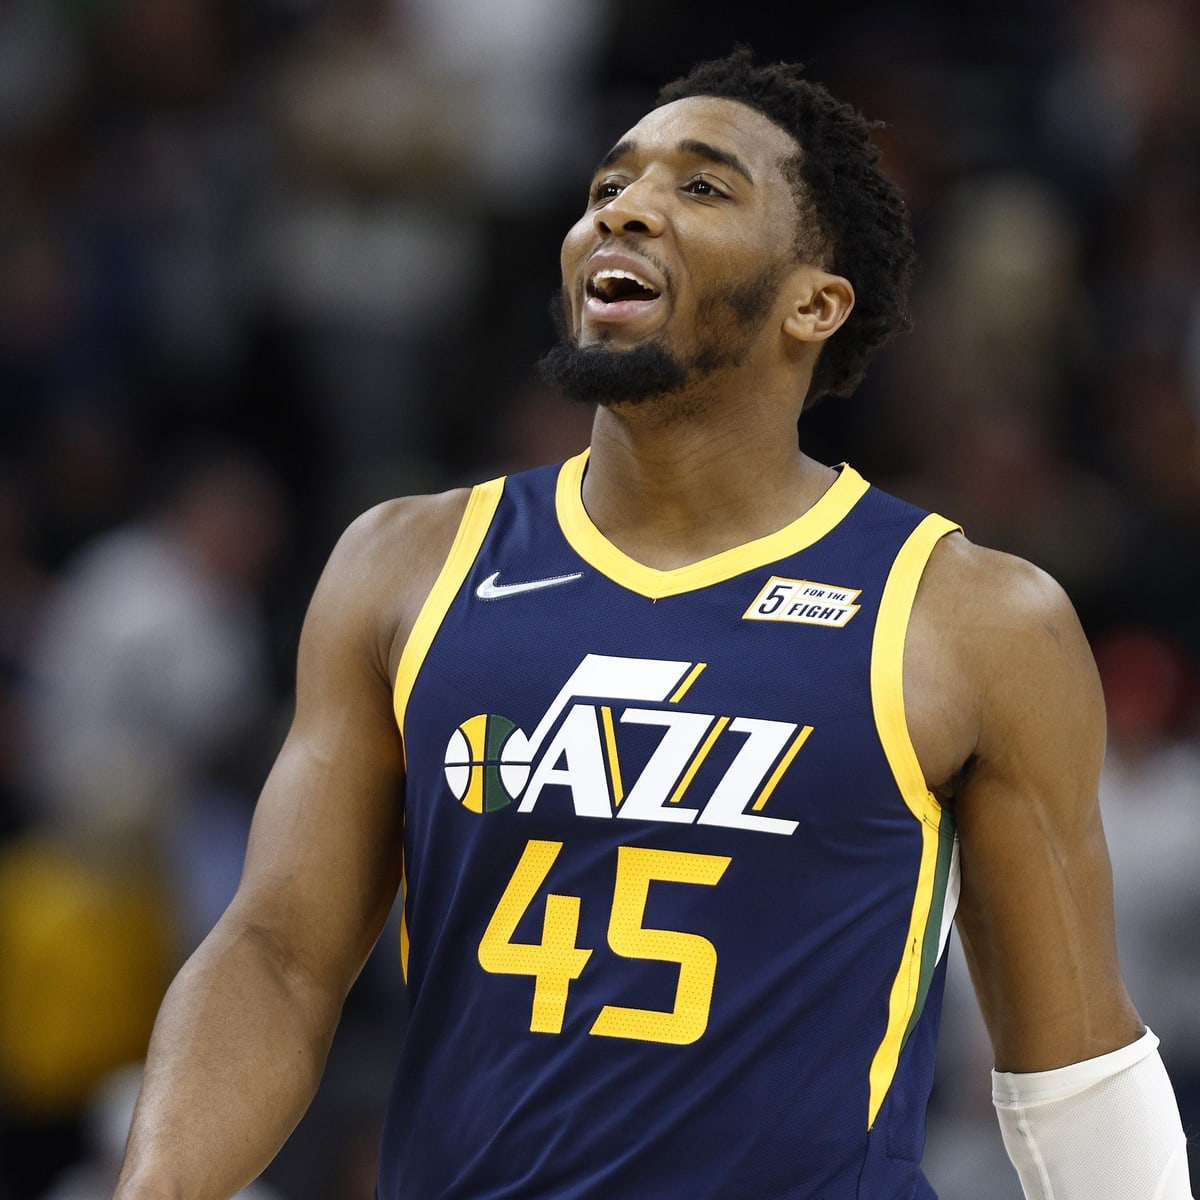 Cavaliers get Donovan Mitchell from Jazz, bolstering their young